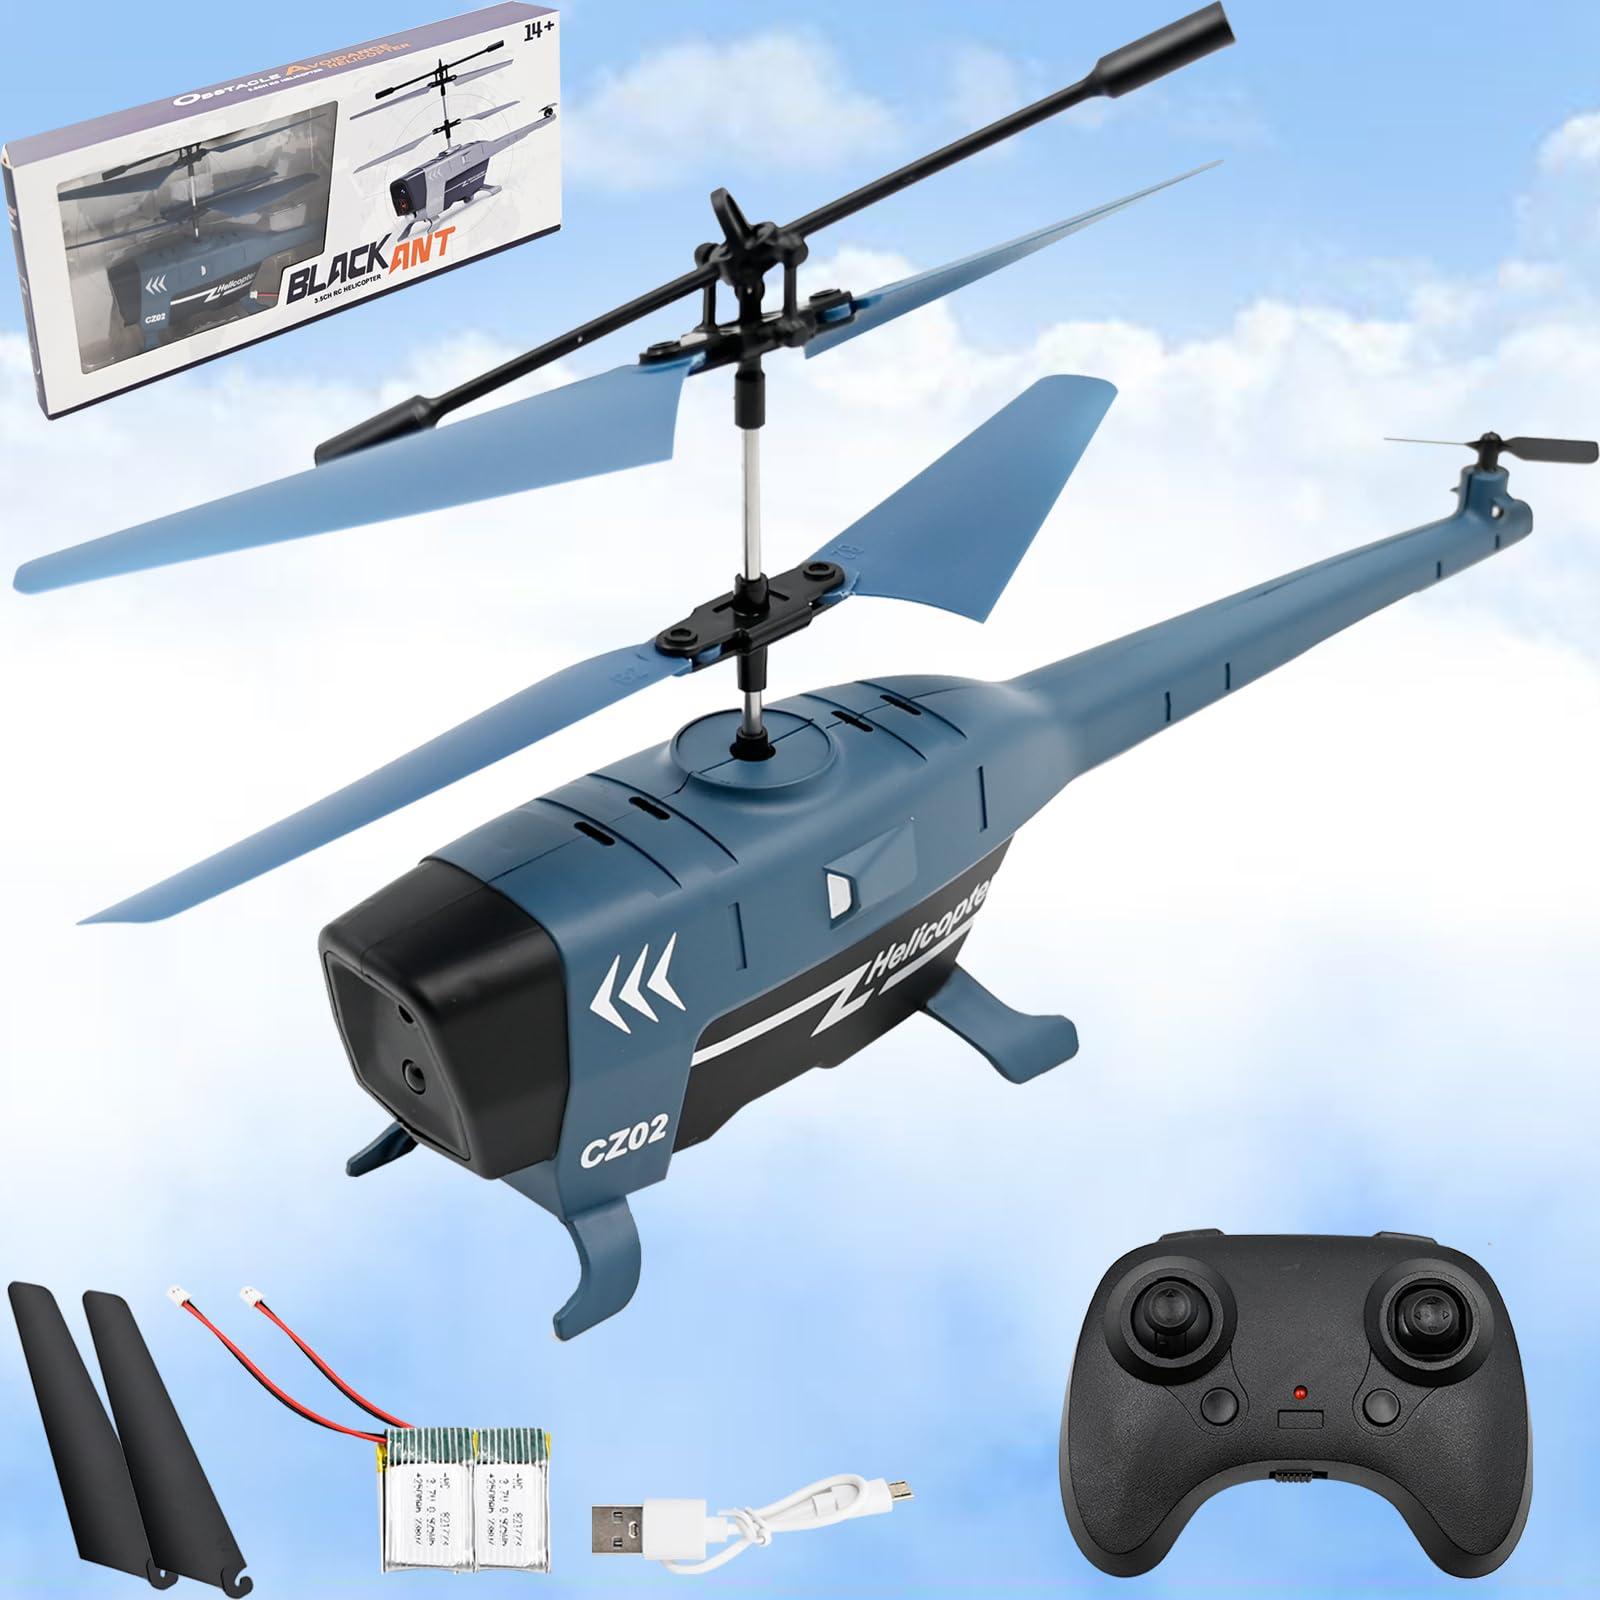 Ch 46 Remote Control Helicopter: Enhance Your CH 46 RC Helicopter Experience Today!